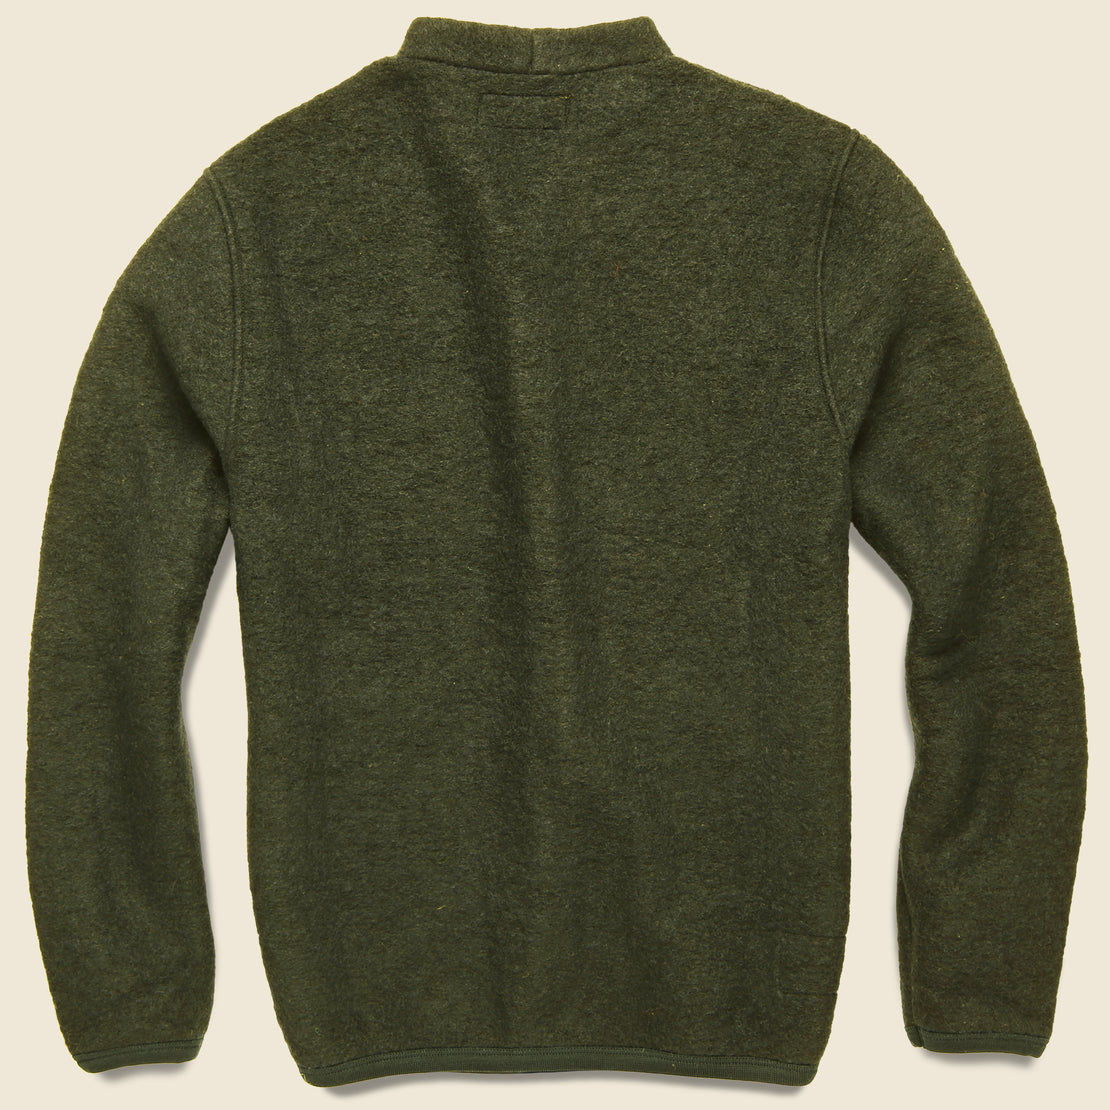 Wool Fleece Cardigan - Olive - Universal Works - STAG Provisions - Tops - Sweater